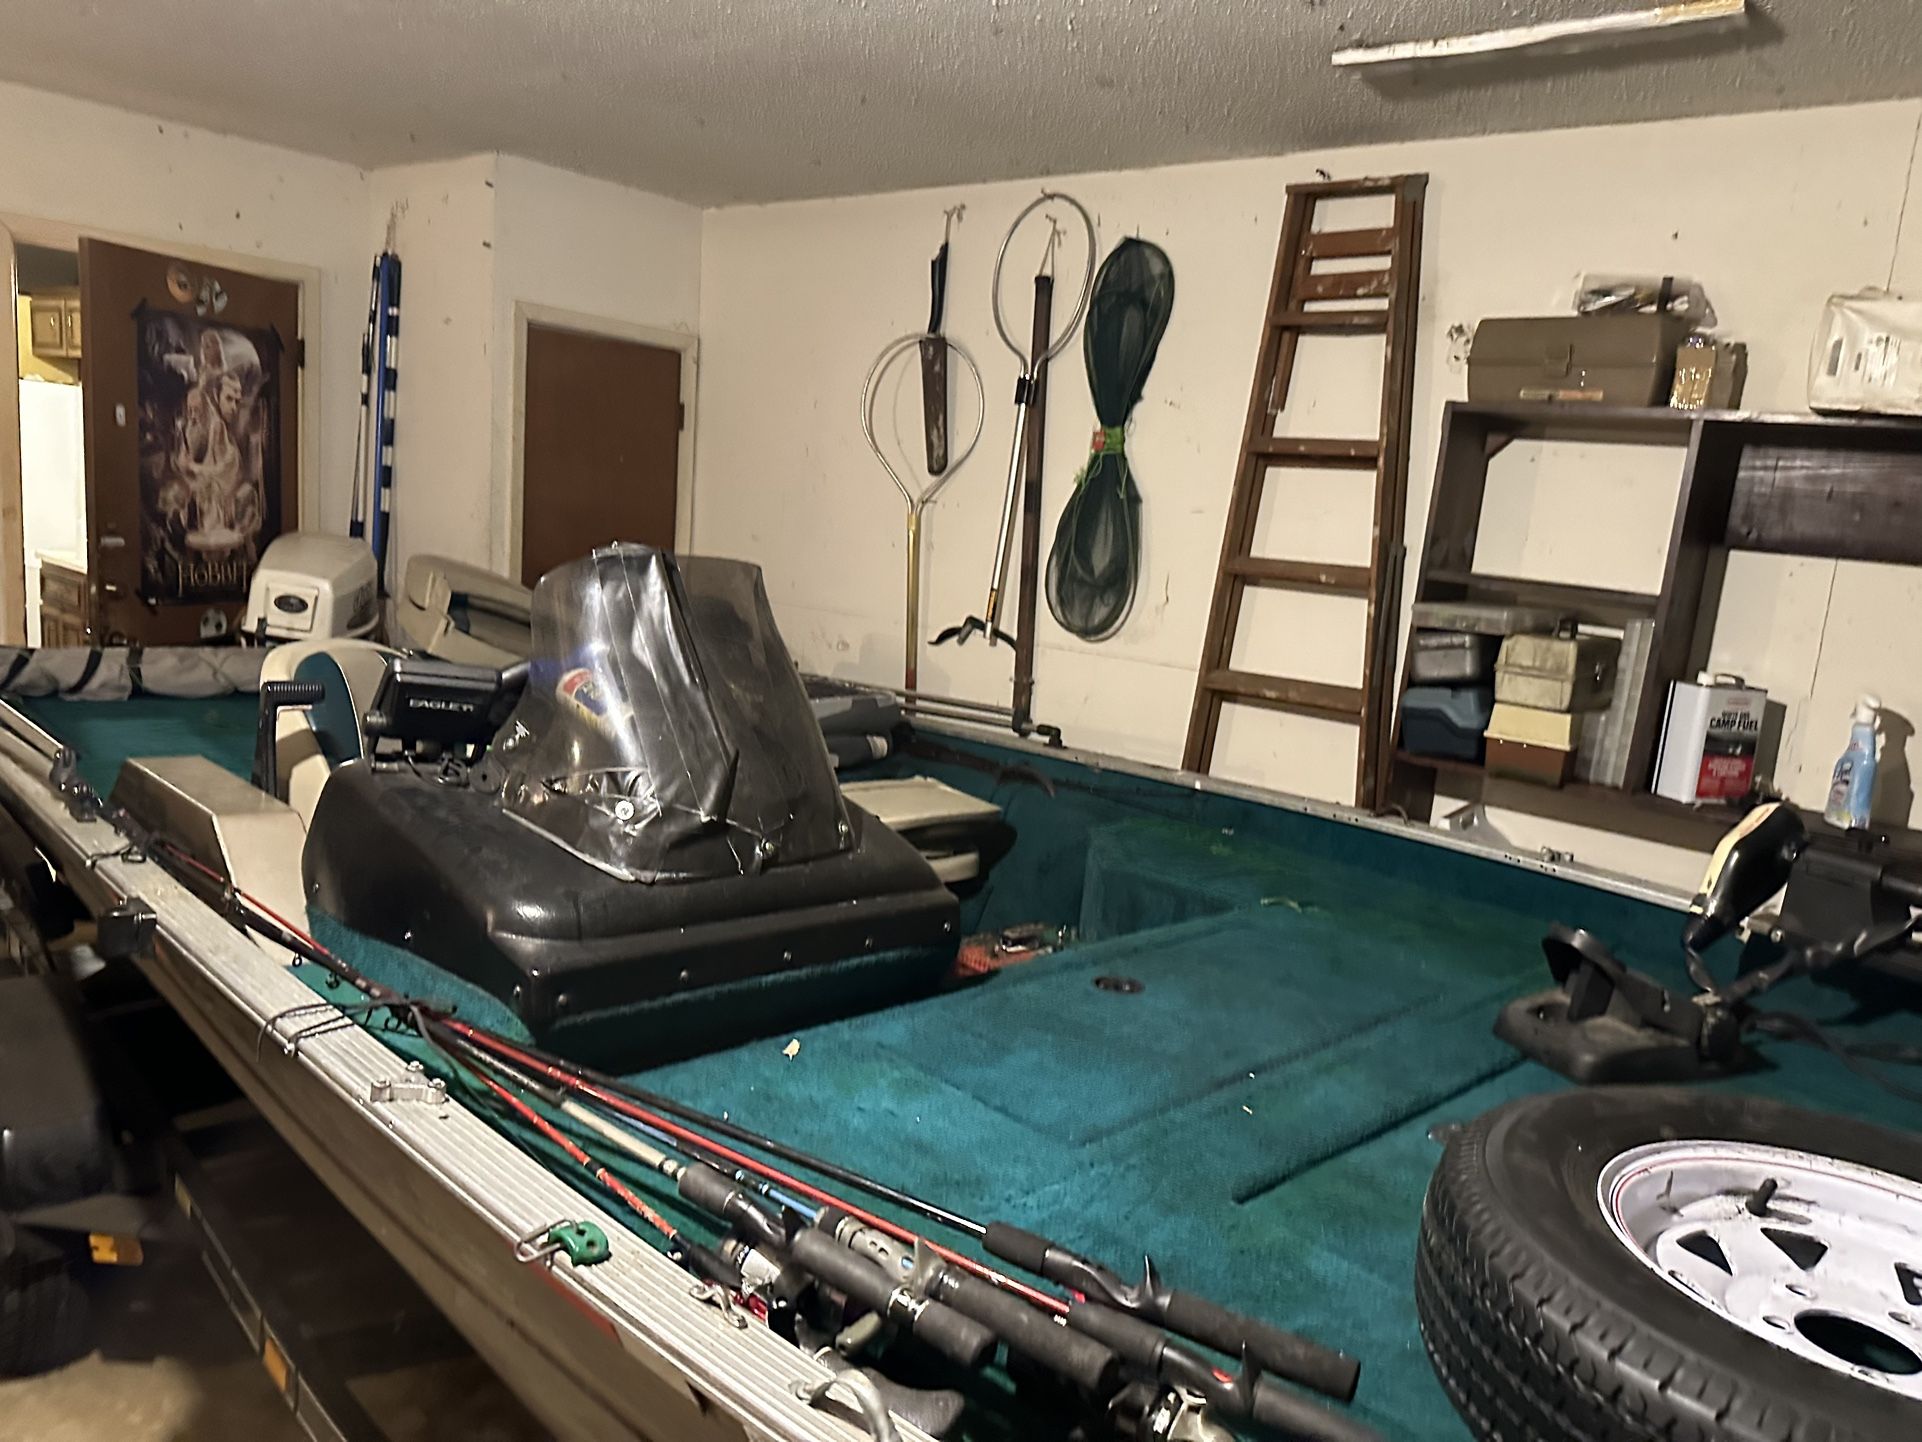 17 Ft. “ Aluminum Boat. The Year Is 2000 That Is Equipped With A Johnson Motor.